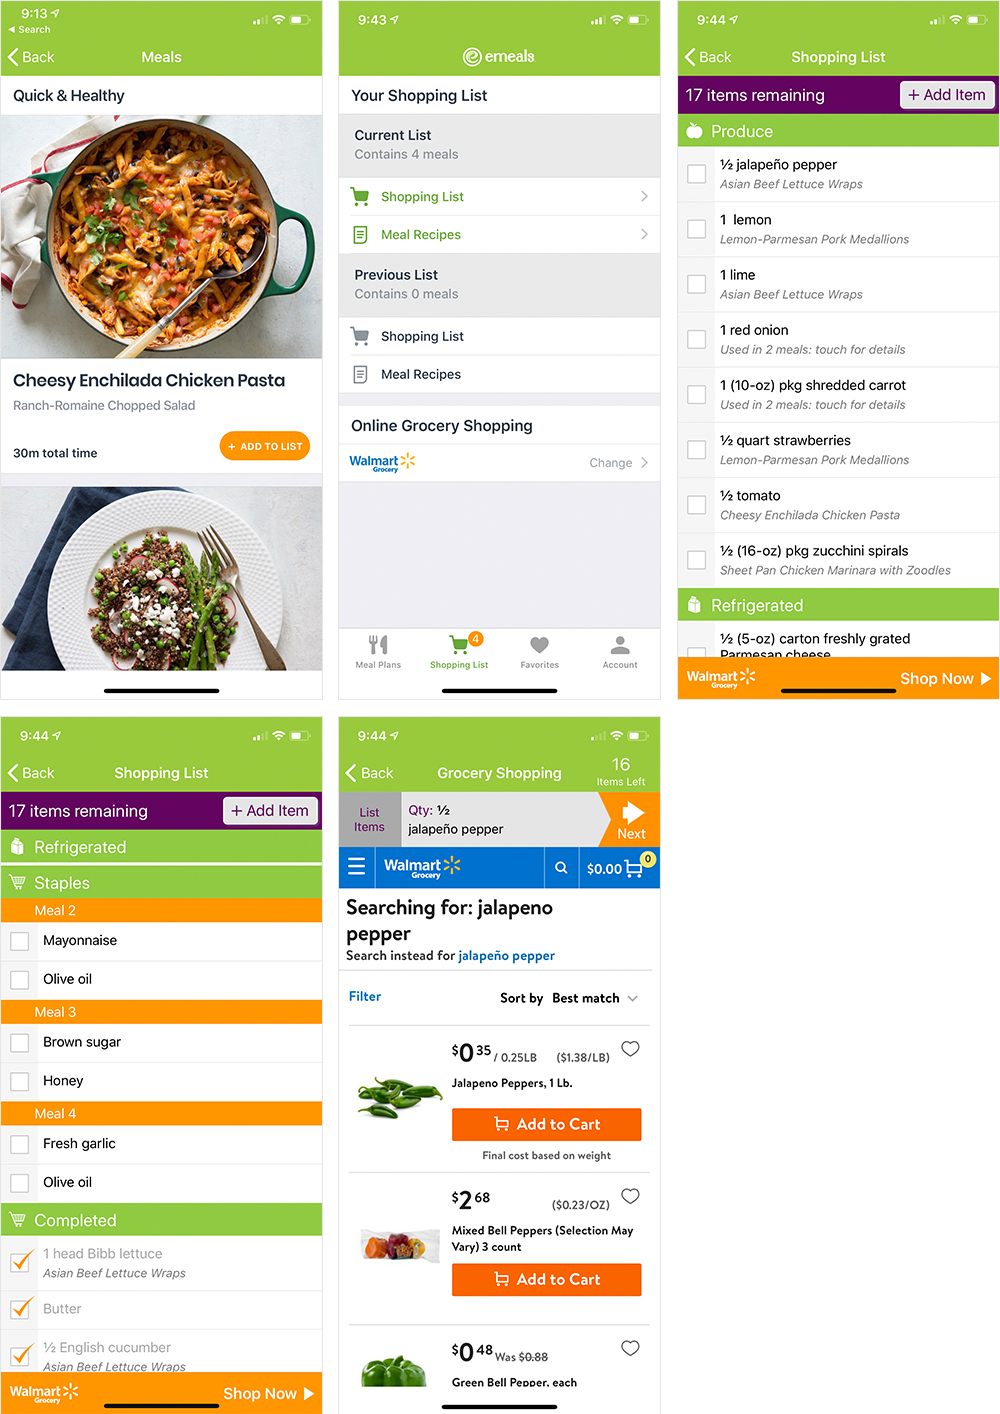 With all of the competition out there when it comes to meal planning services, it's hard to know which one to choose. That's why I'm reviewing a wide variety of meal planning services for you, and today I'm doing an emeals review.